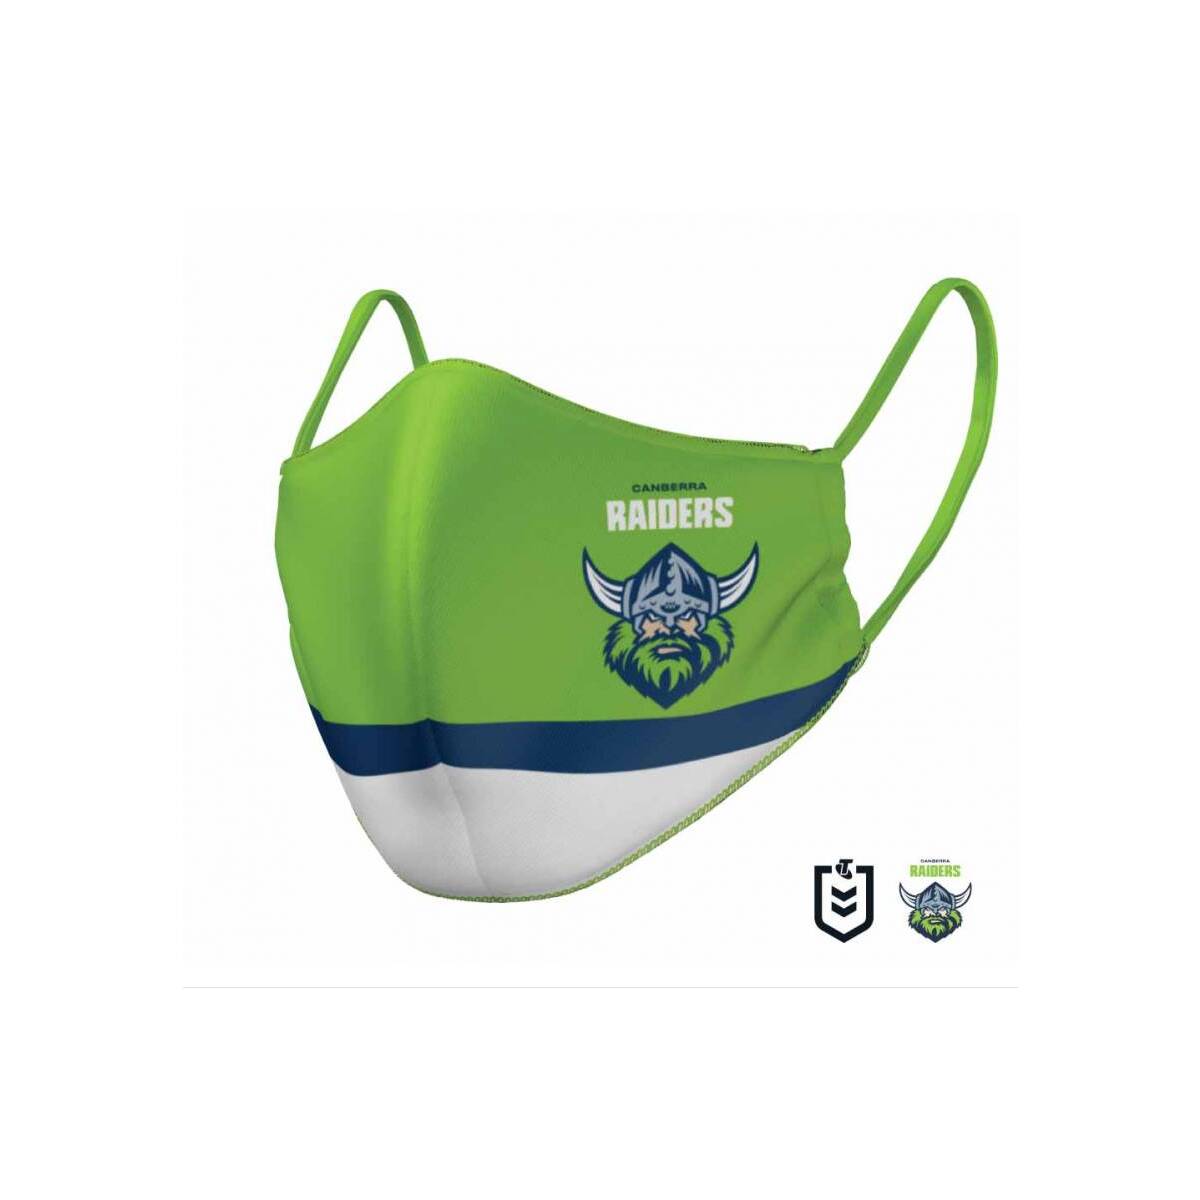 Canberra Raiders Face Mask Adult Small0